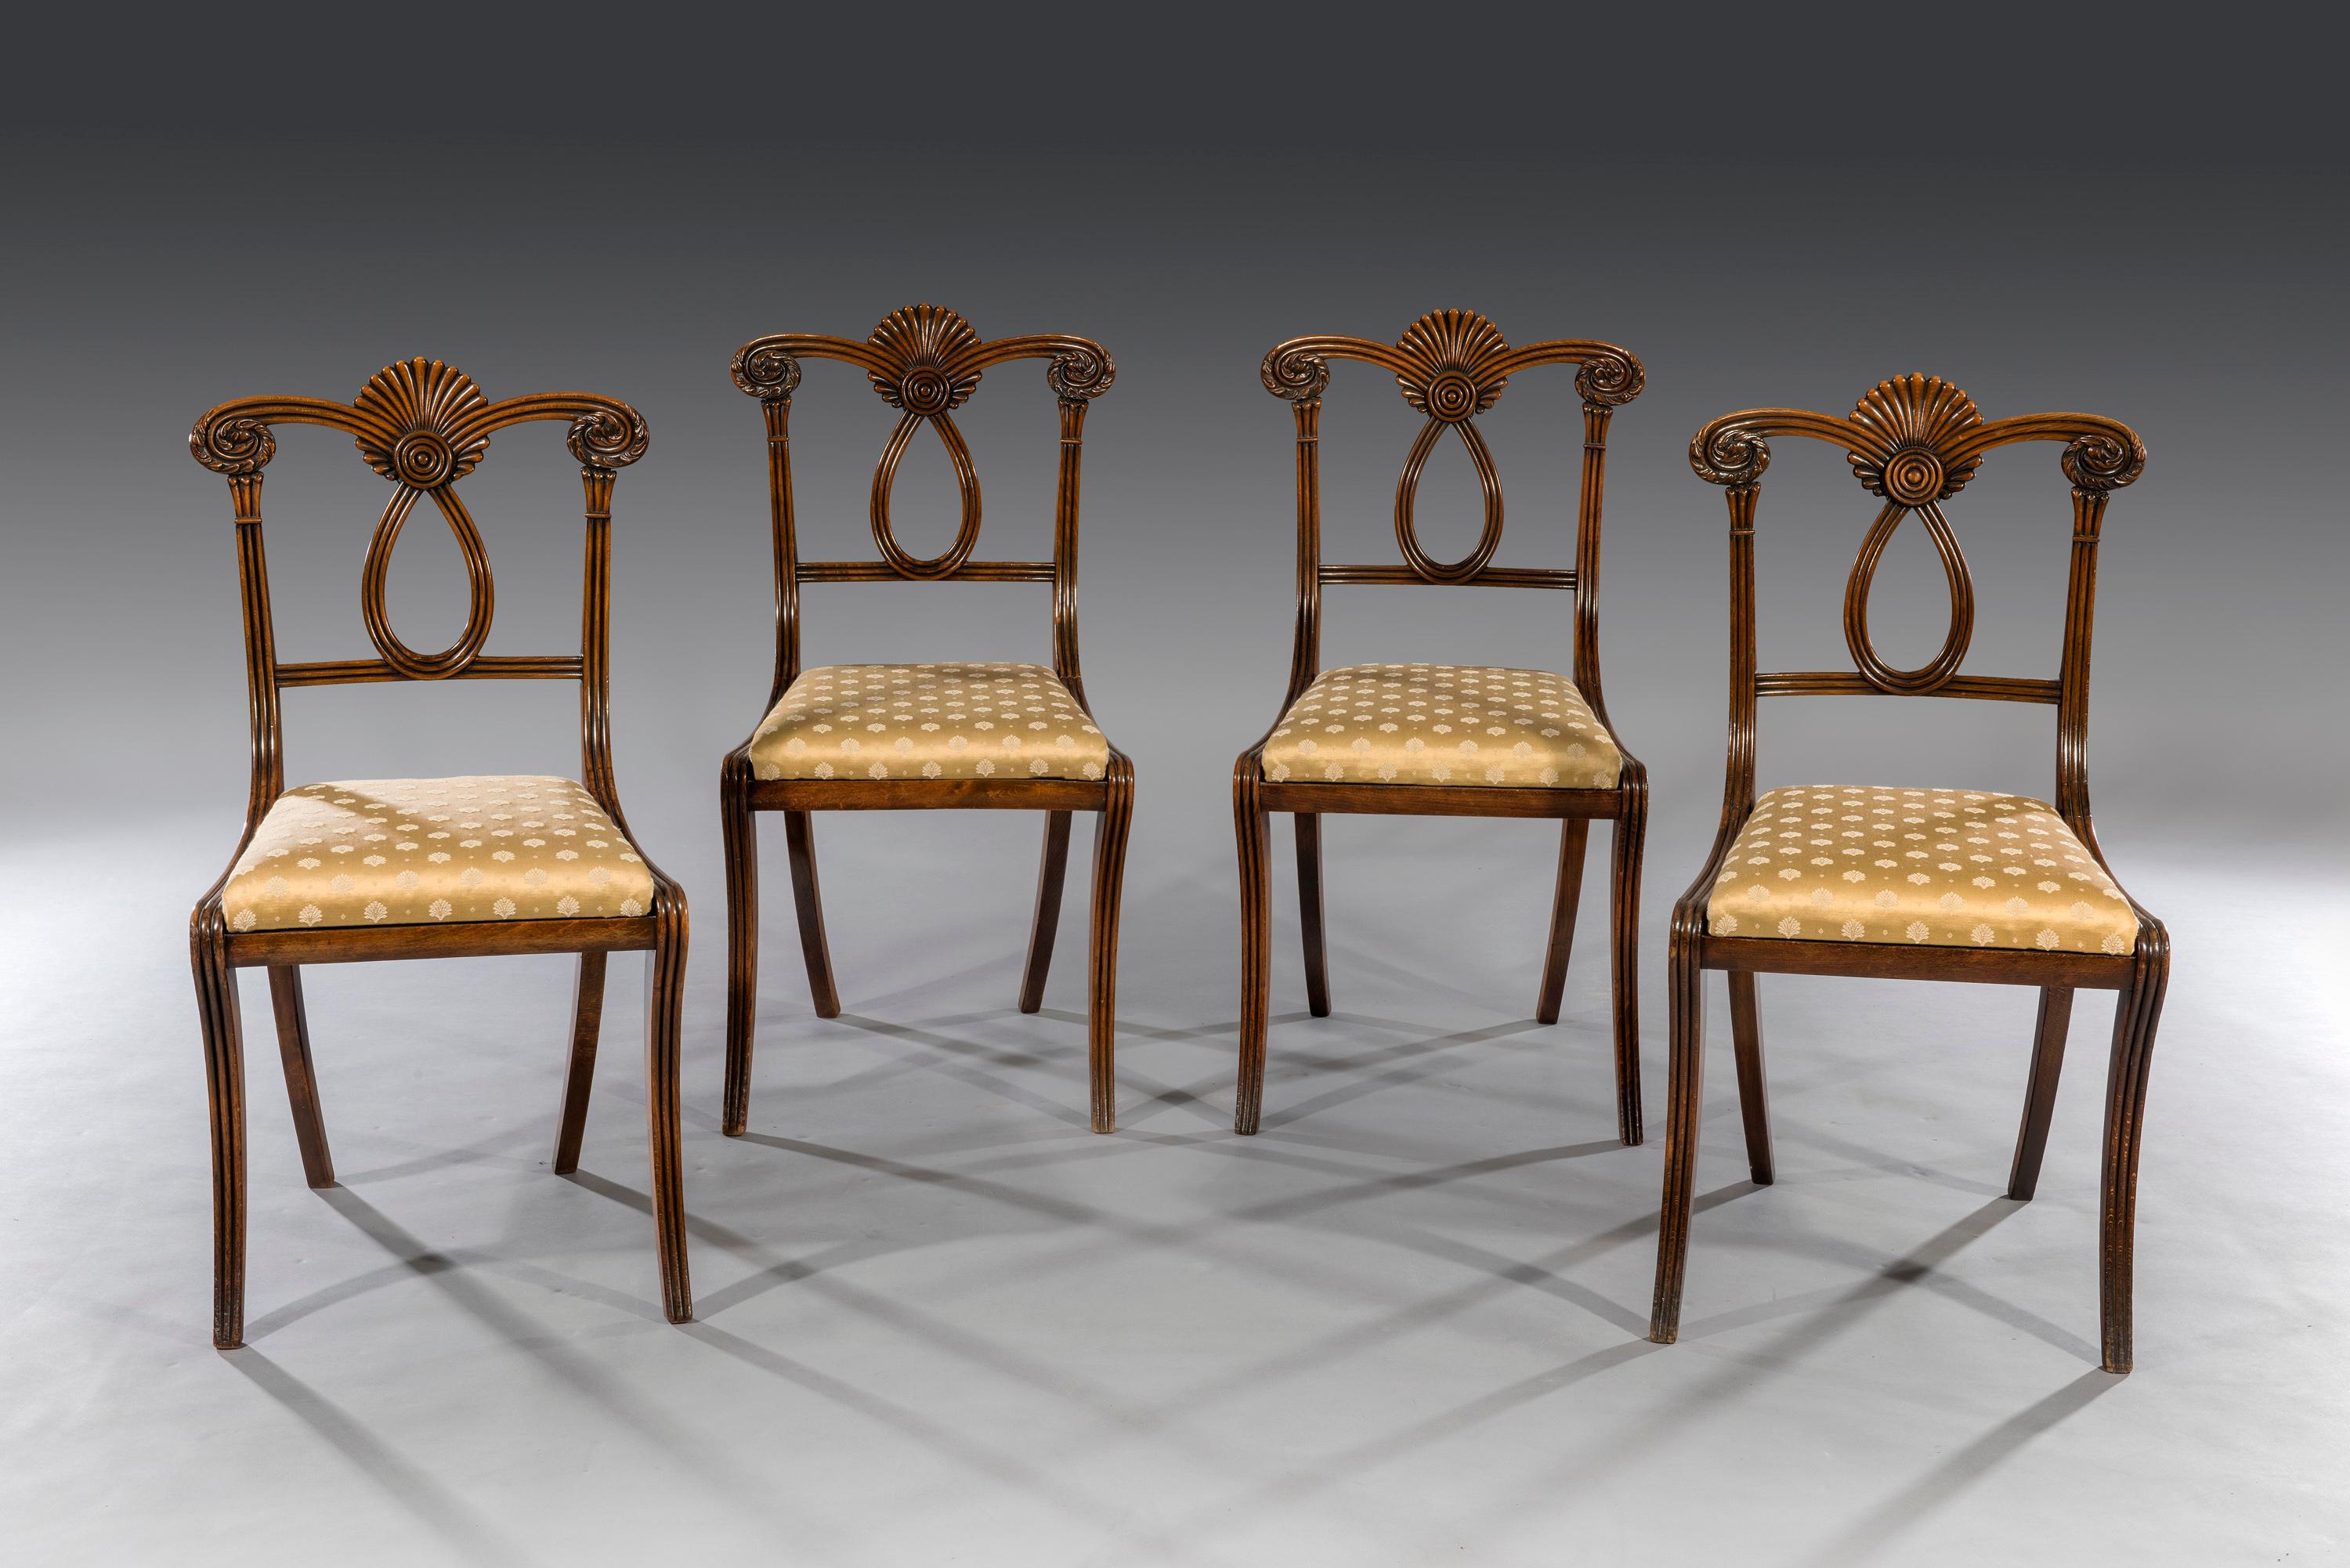 British Set of Four Early 19th Century Regency Period Carved Beechwood Side Chairs For Sale